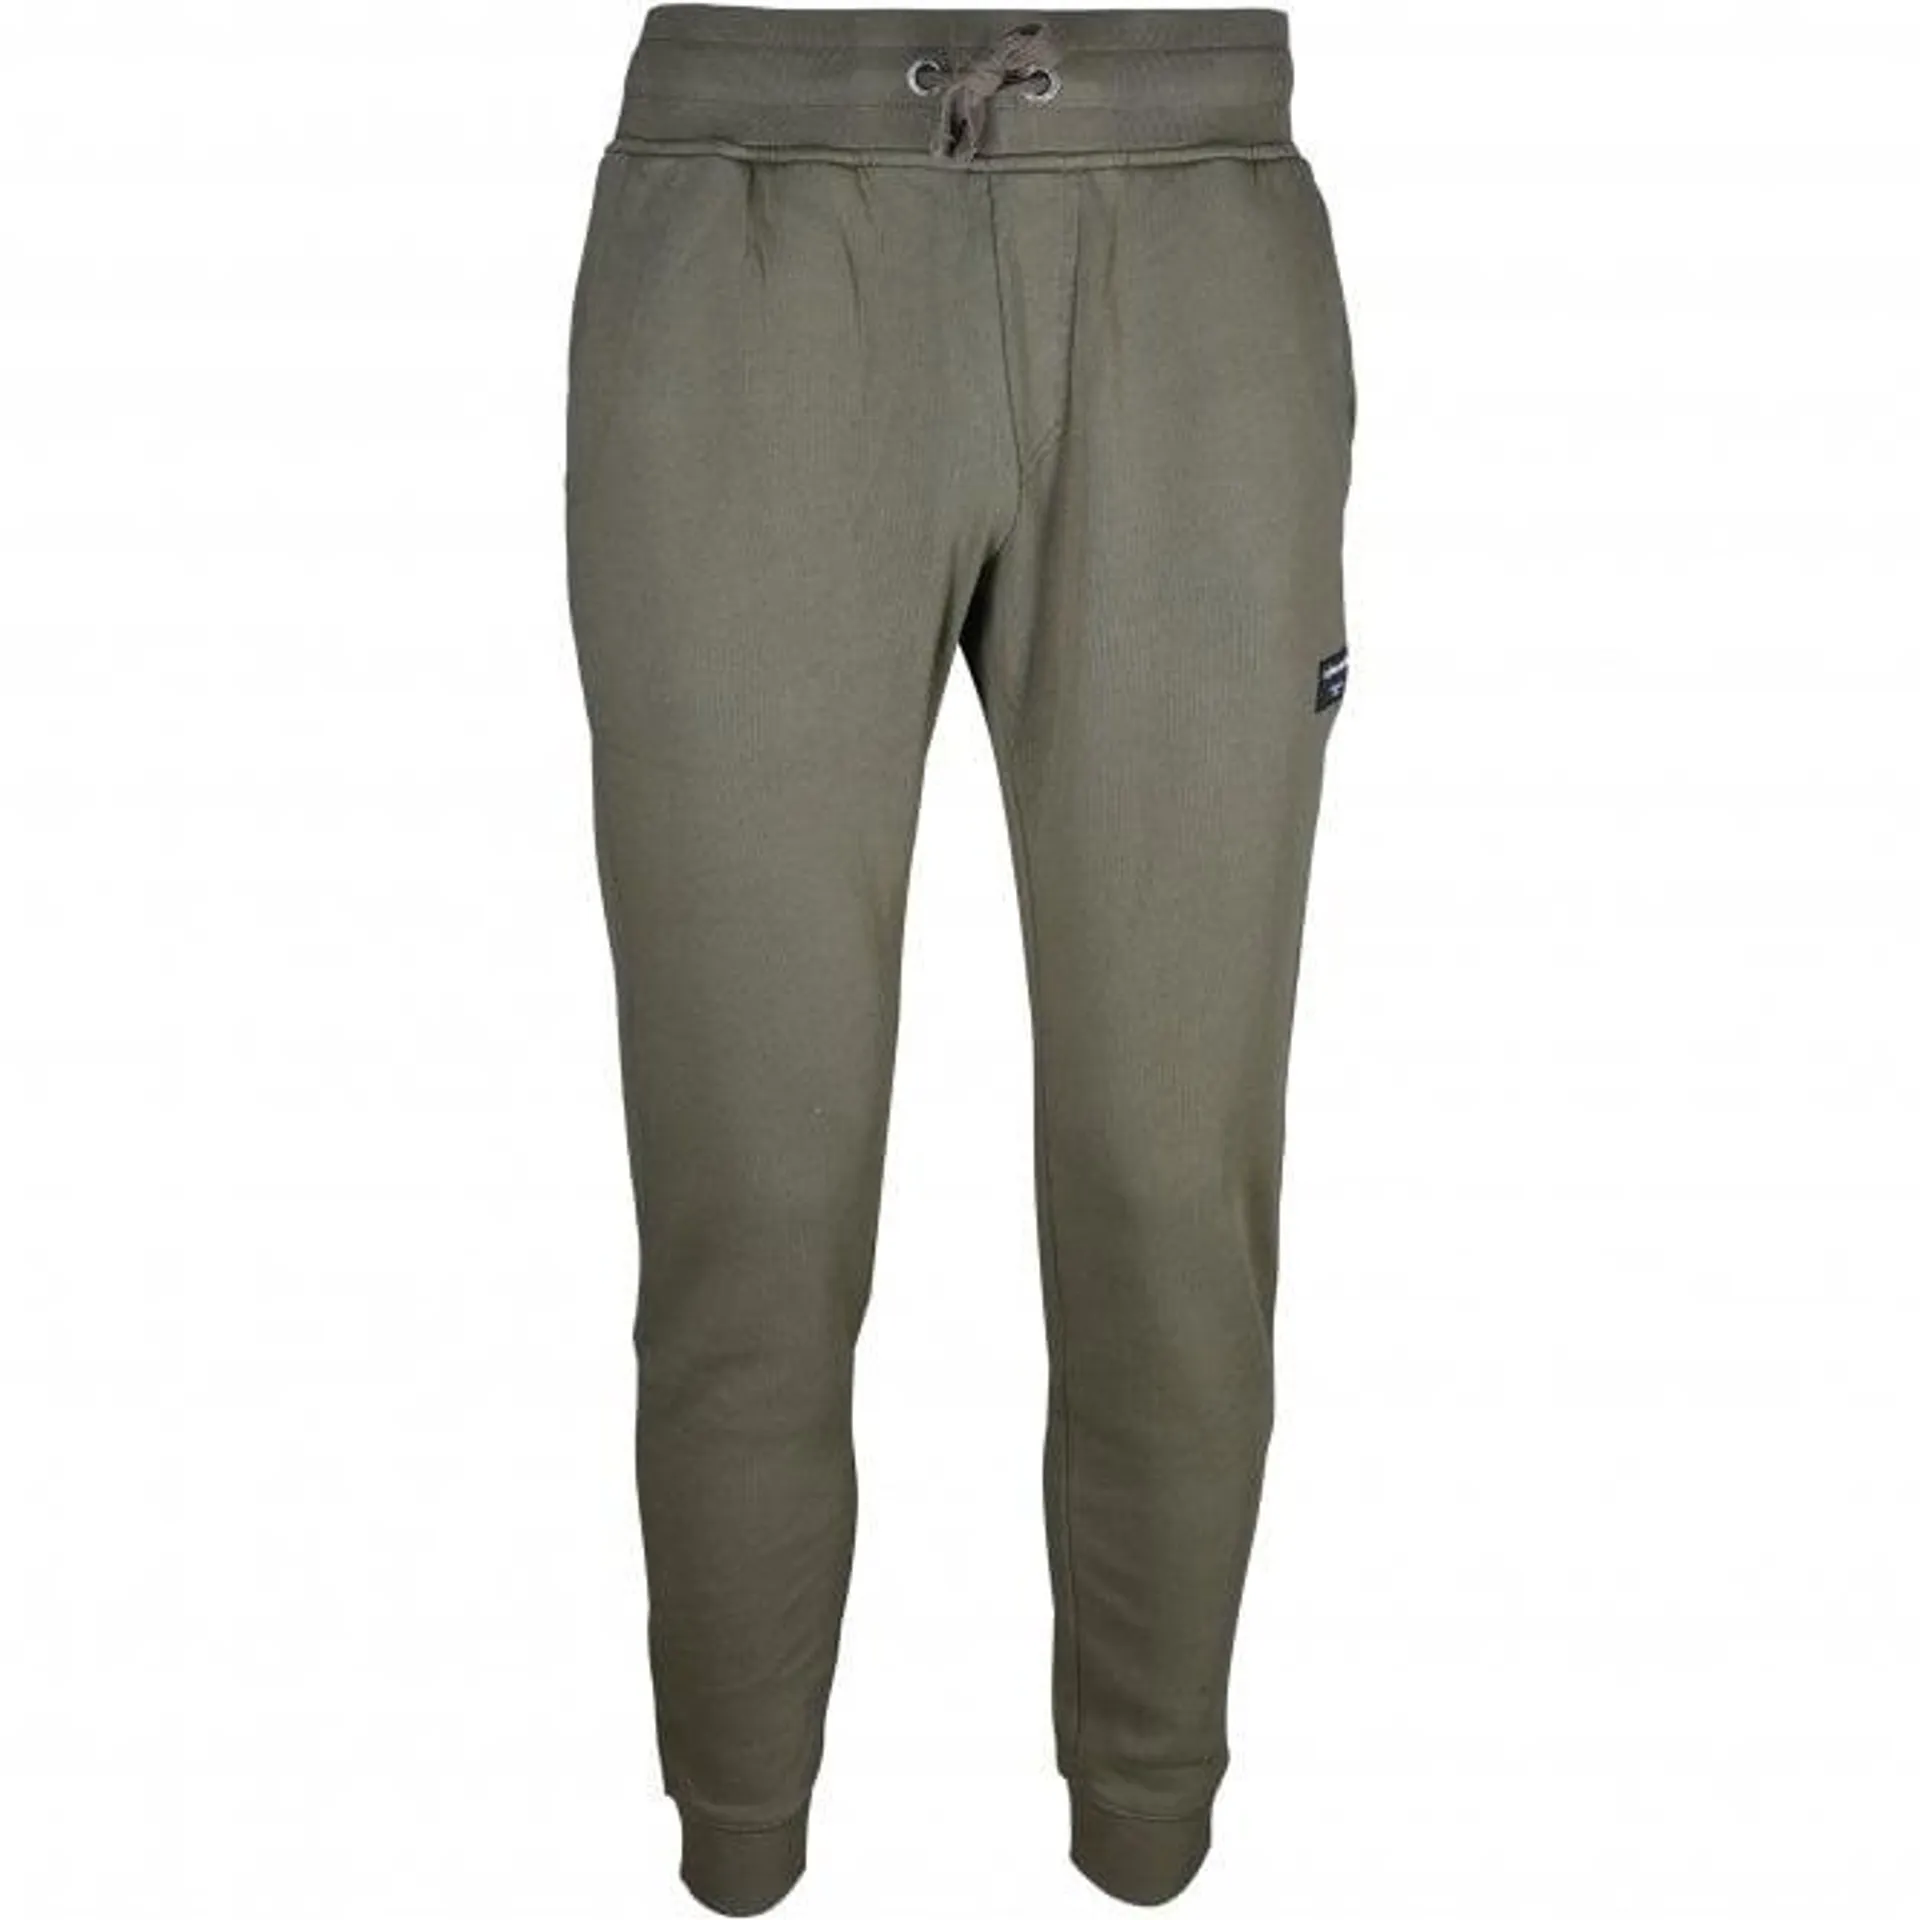 Bjorn Borg Centre Tracksuit Tapered Jogging Bottoms, Ivy Green